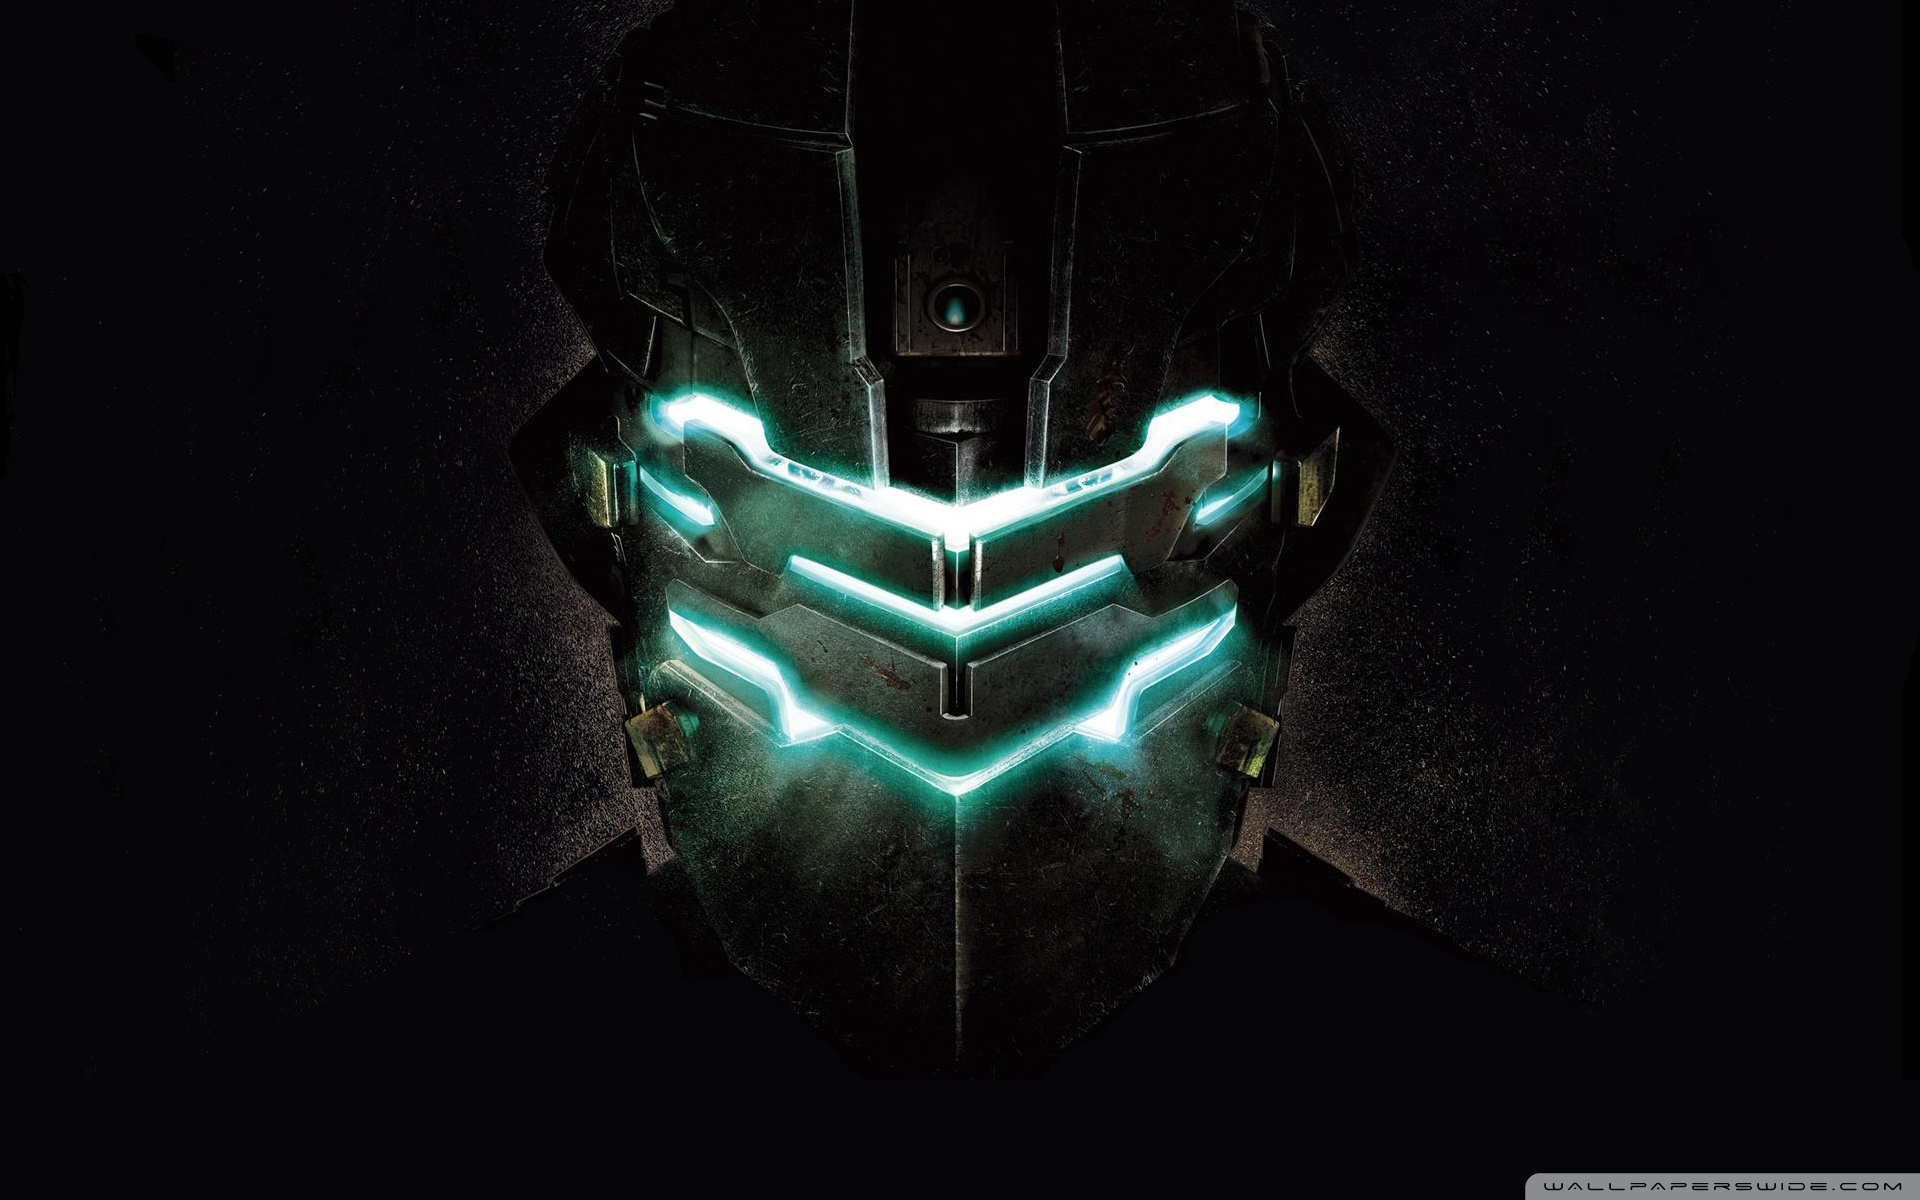 Wallpaperswide Com Dead Space Ultra Hd Wallpapers For Uhd Widescreen Ultrawide Multi Display Desktop Tablet Smartphone Page 1